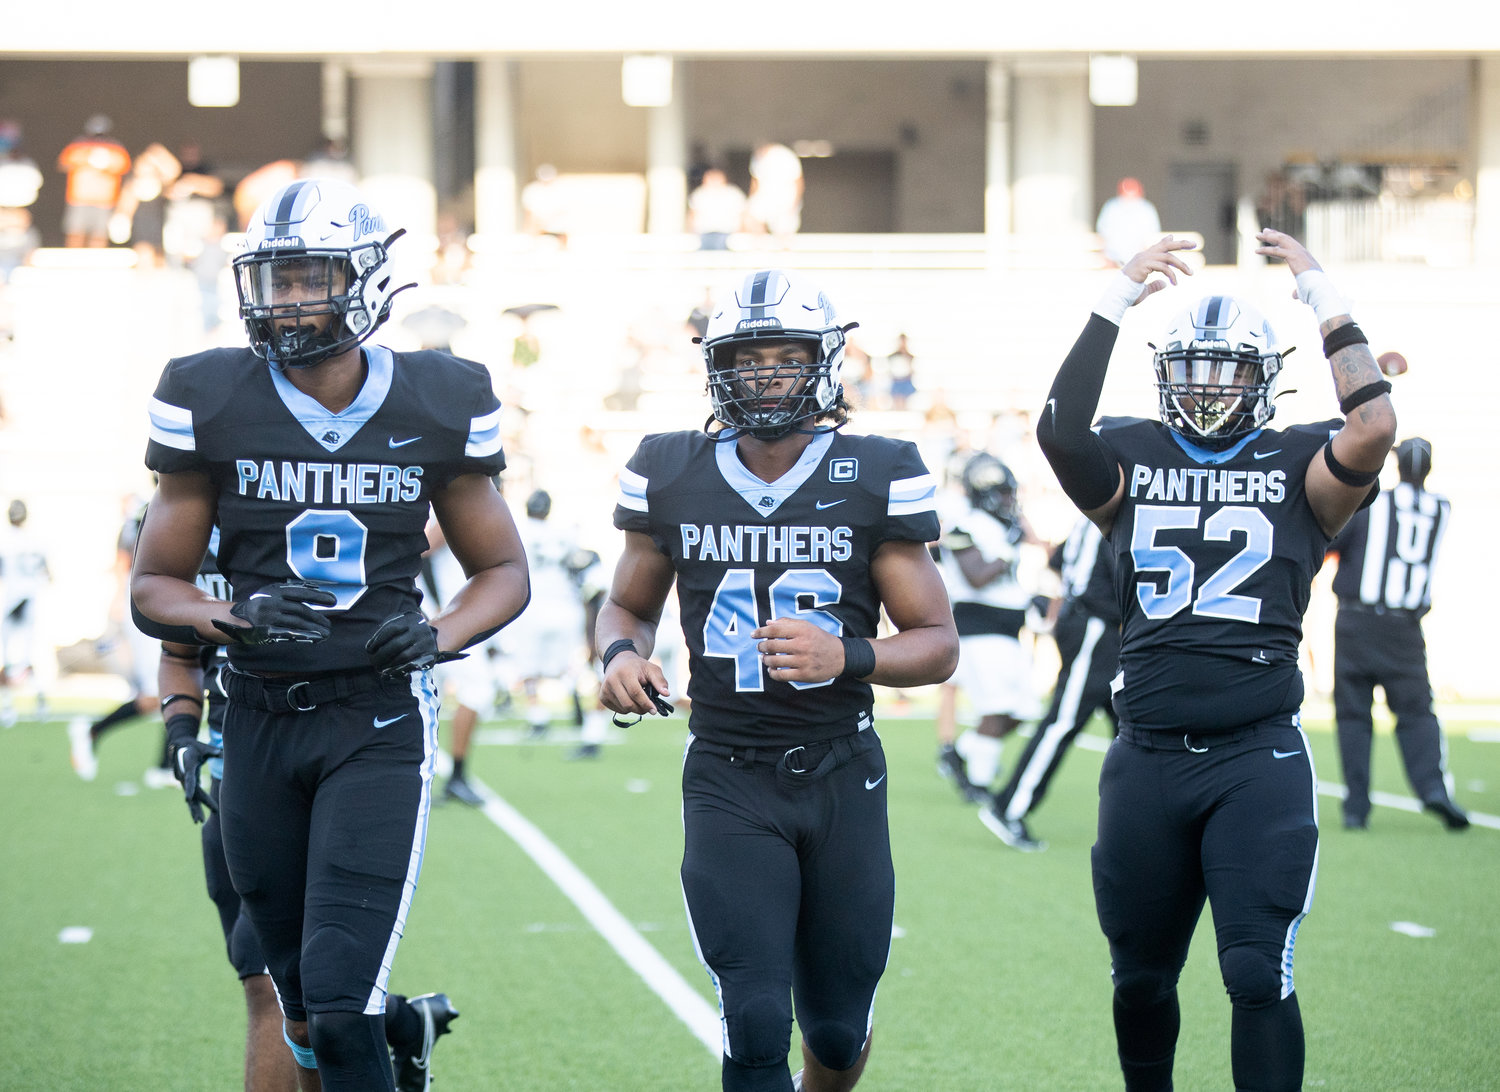 Paetow players celebrate as they come off the field after forcing a turnover during Friday’s game against Conroe at Legacy Stadium.